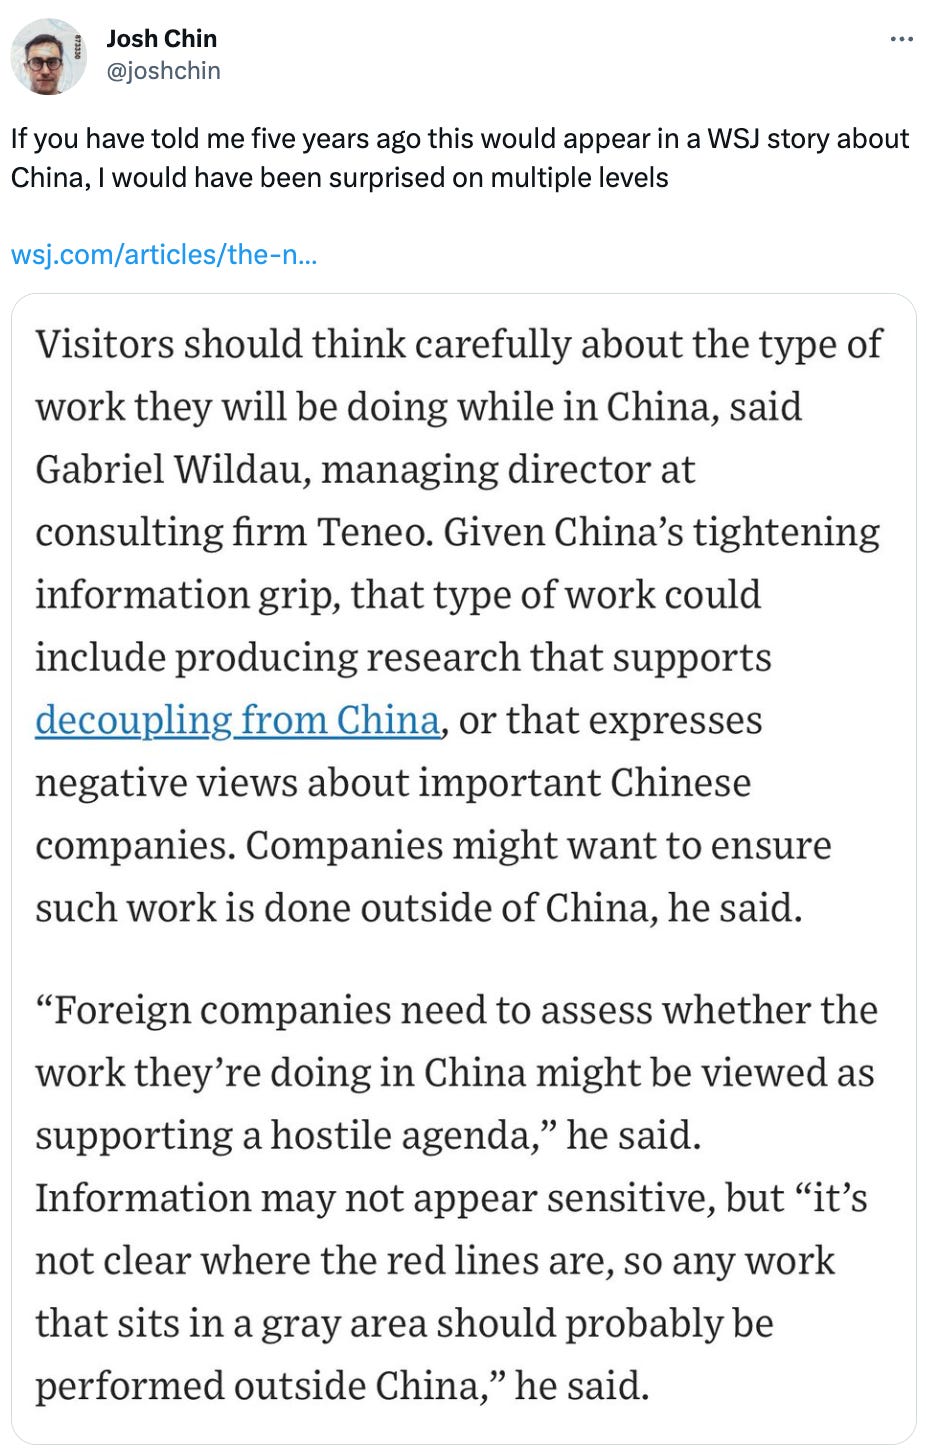  Josh Chin @joshchin If you have told me five years ago this would appear in a WSJ story about China, I would have been surprised on multiple levels   https://wsj.com/articles/the-new-rules-for-business-travel-to-china-f476f7b7